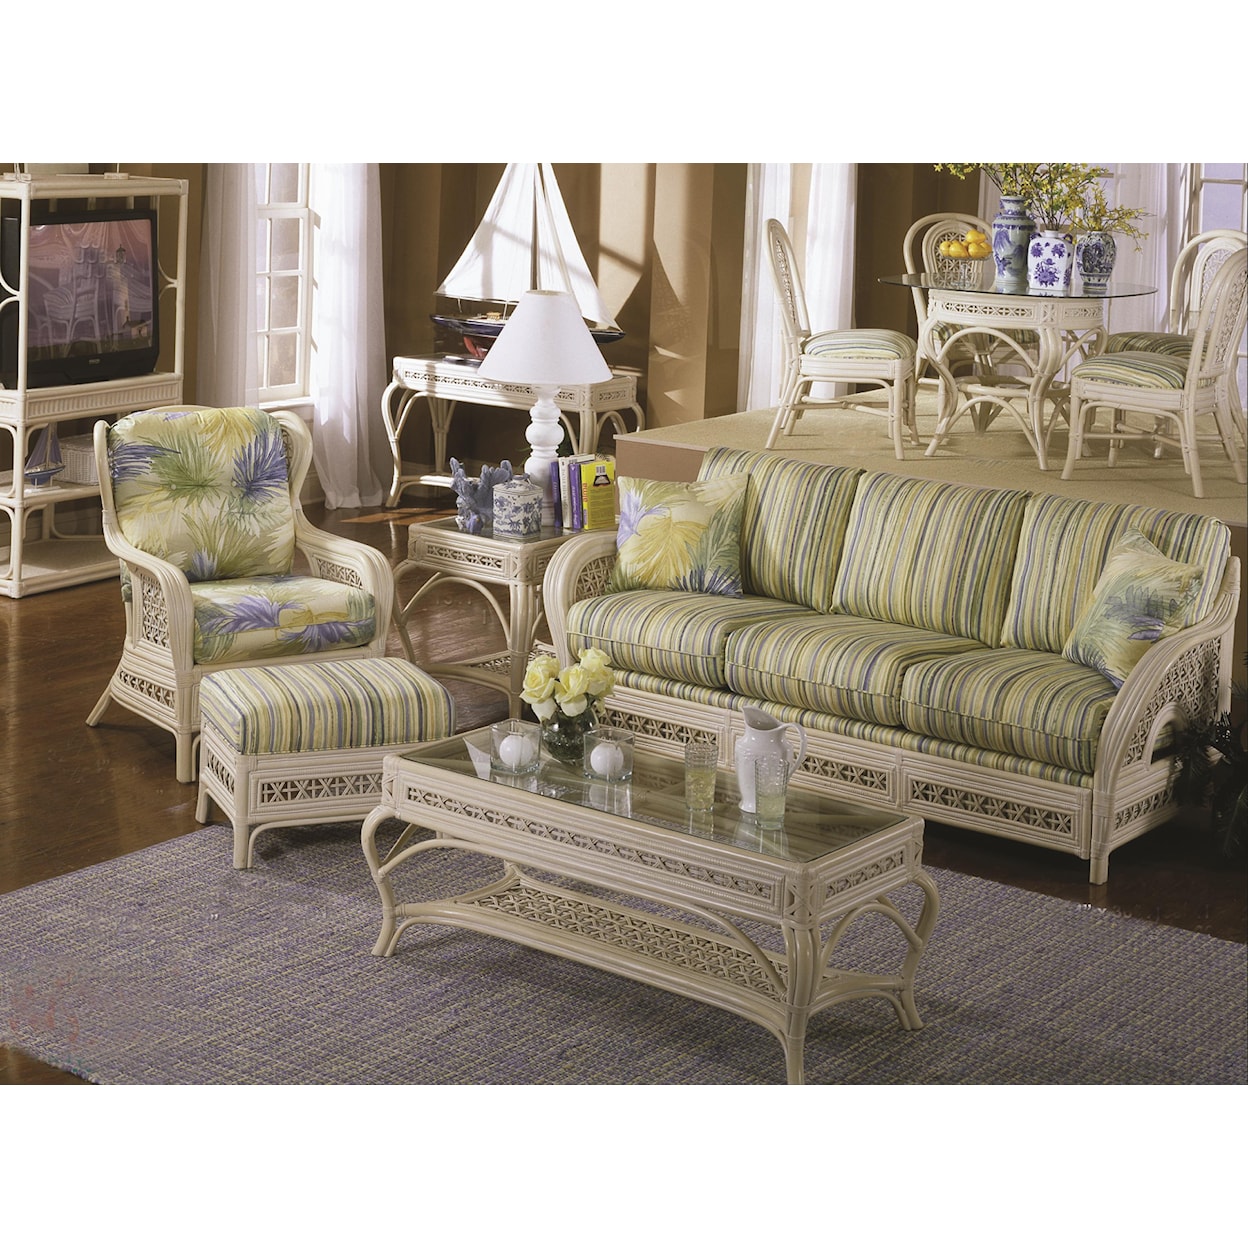 Capris Furniture 341 Collection Wicker Rattan Chair and Ottoman